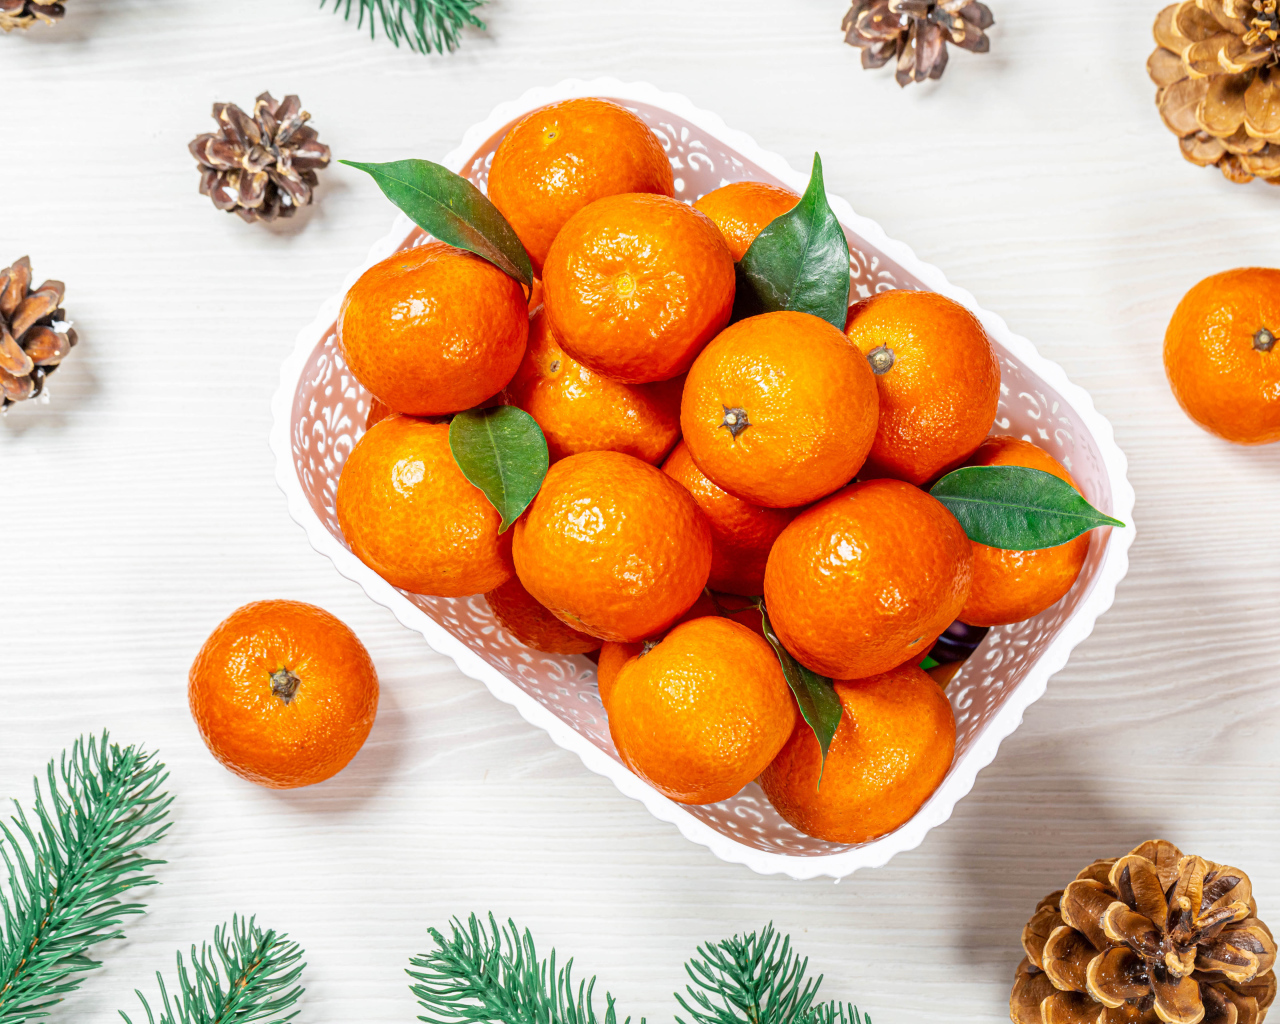 Many ripe tangerines in a white basket on a table with pine cones